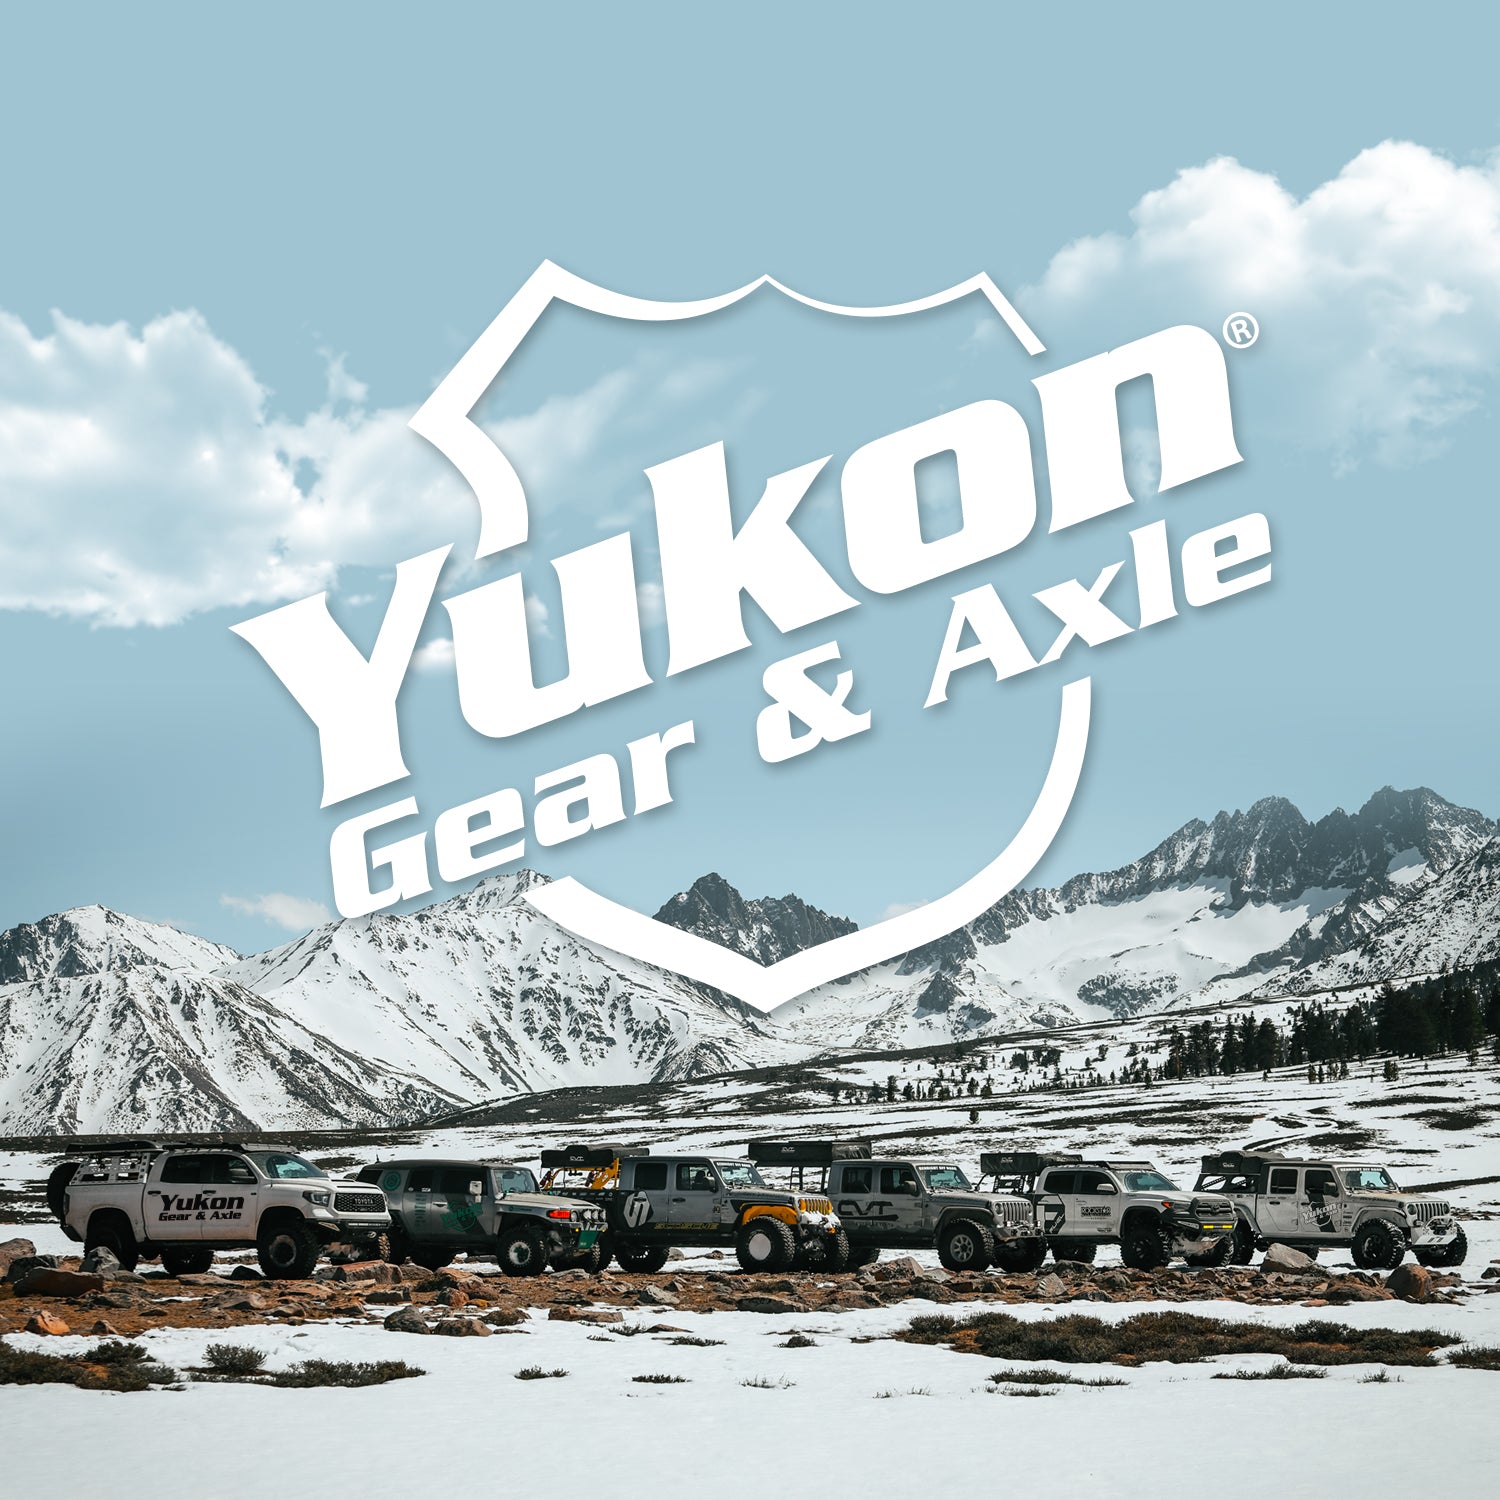 Yukon Gear Chevrolet GMC Hummer (4WD) Differential Carrier Gear Kit - Front Axle YPKGM9.25IFS-S-33